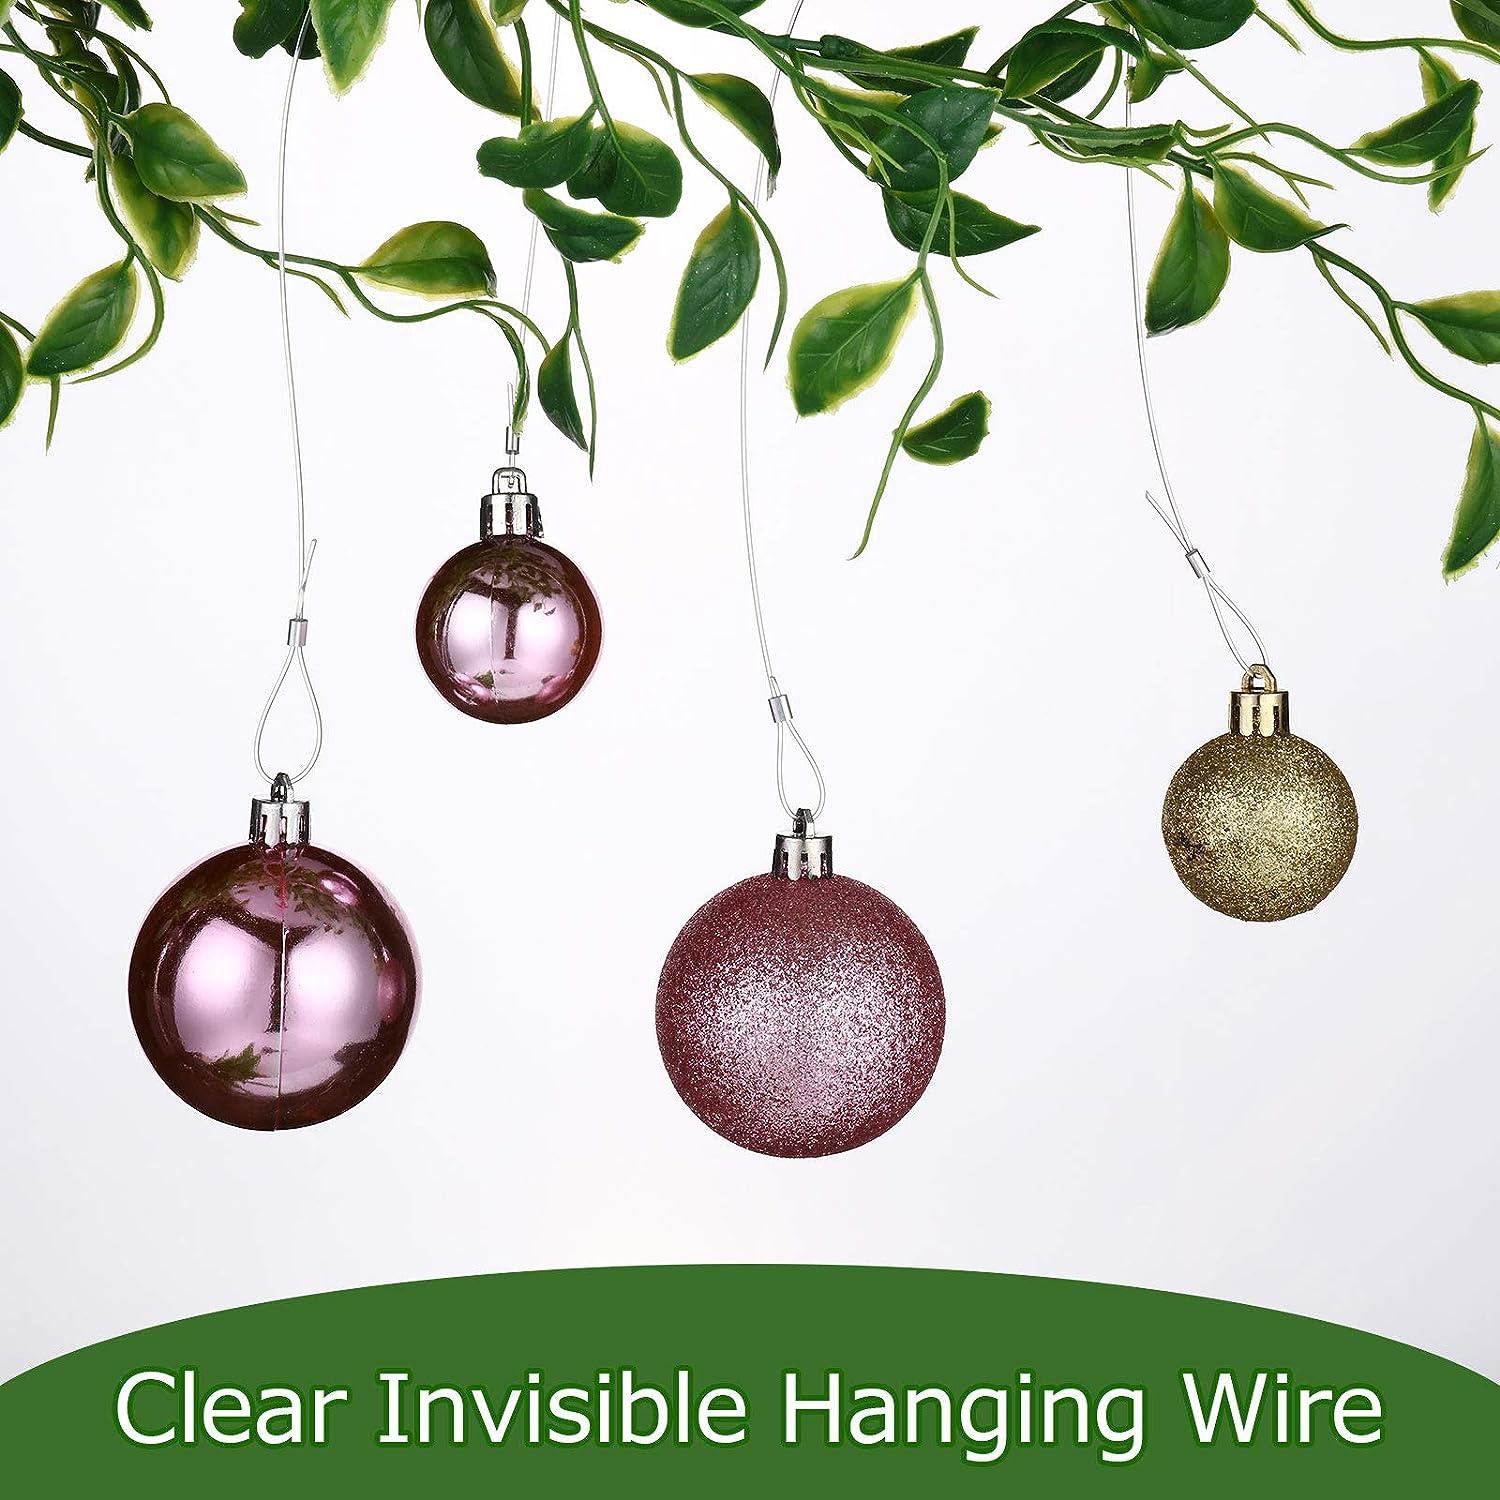 Invisible Hanging Wire Supports Up to 60lbs,98Feet(30M) Clear Picture Wire with 40pcs Aluminum Crimping Sleeves,Strong Nylon Wire for Hanging Picture